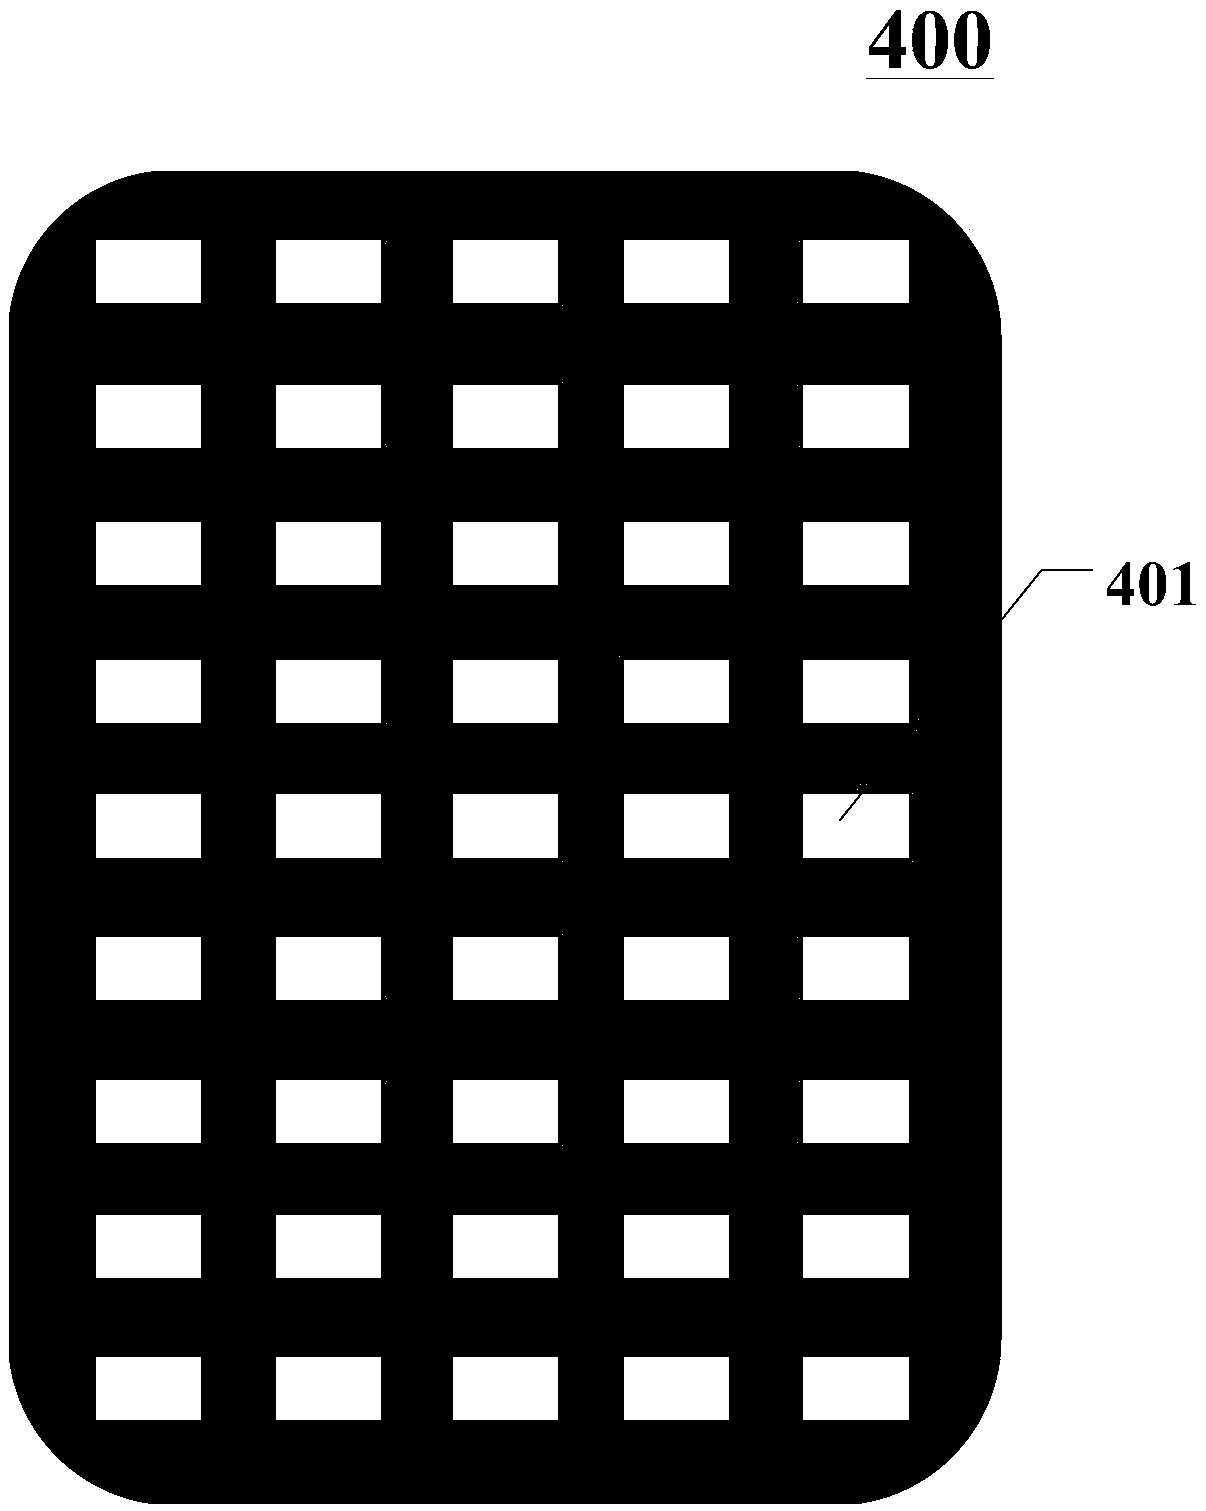 LED backlight source, backlight source module and display device